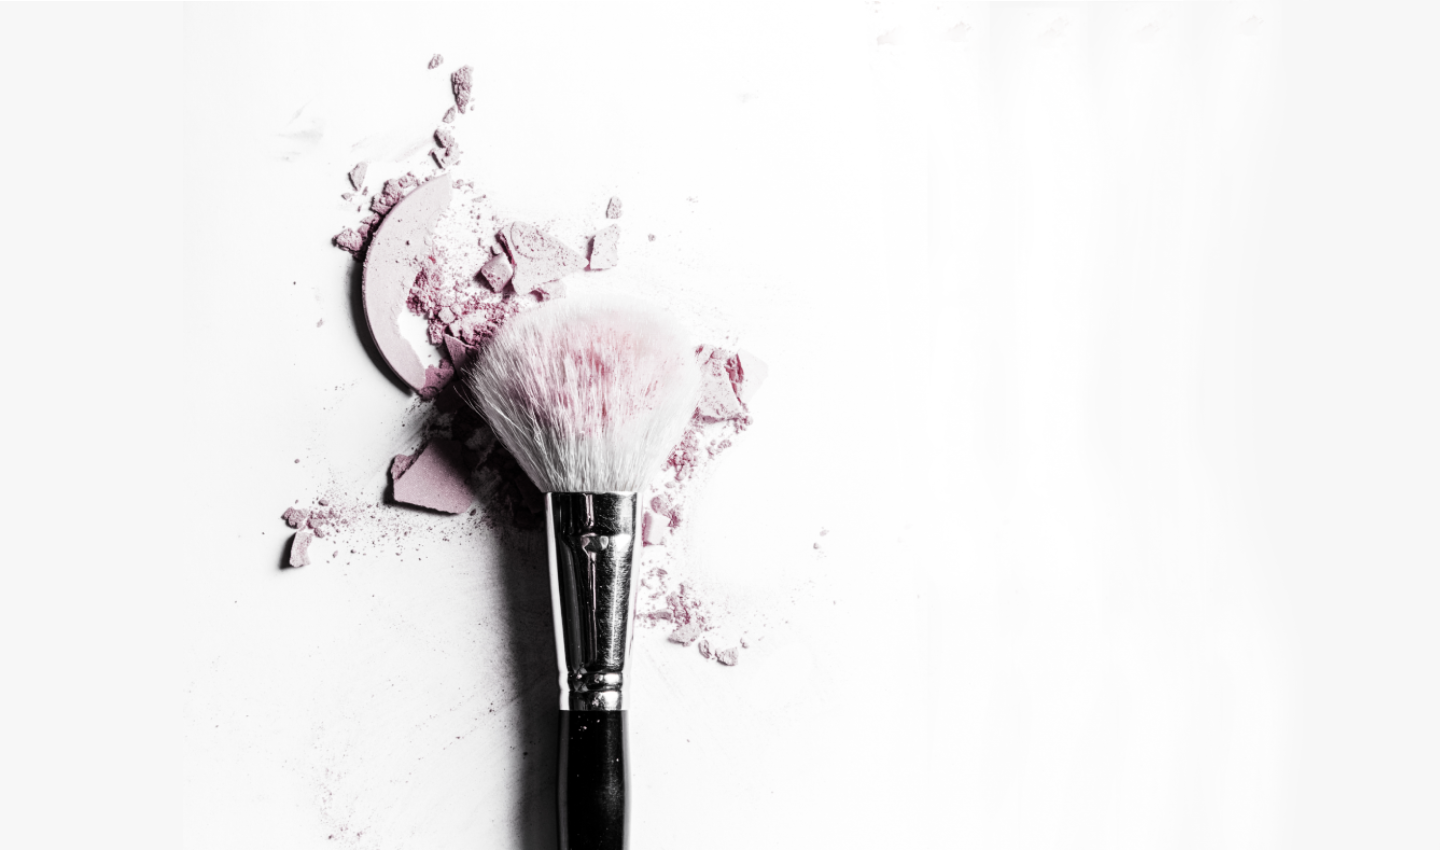 A makeup brush with synthetic bristles is shown alongside a pot of violet blush. The brush's design allows for precise application and represents the evolution of makeup brush technology.